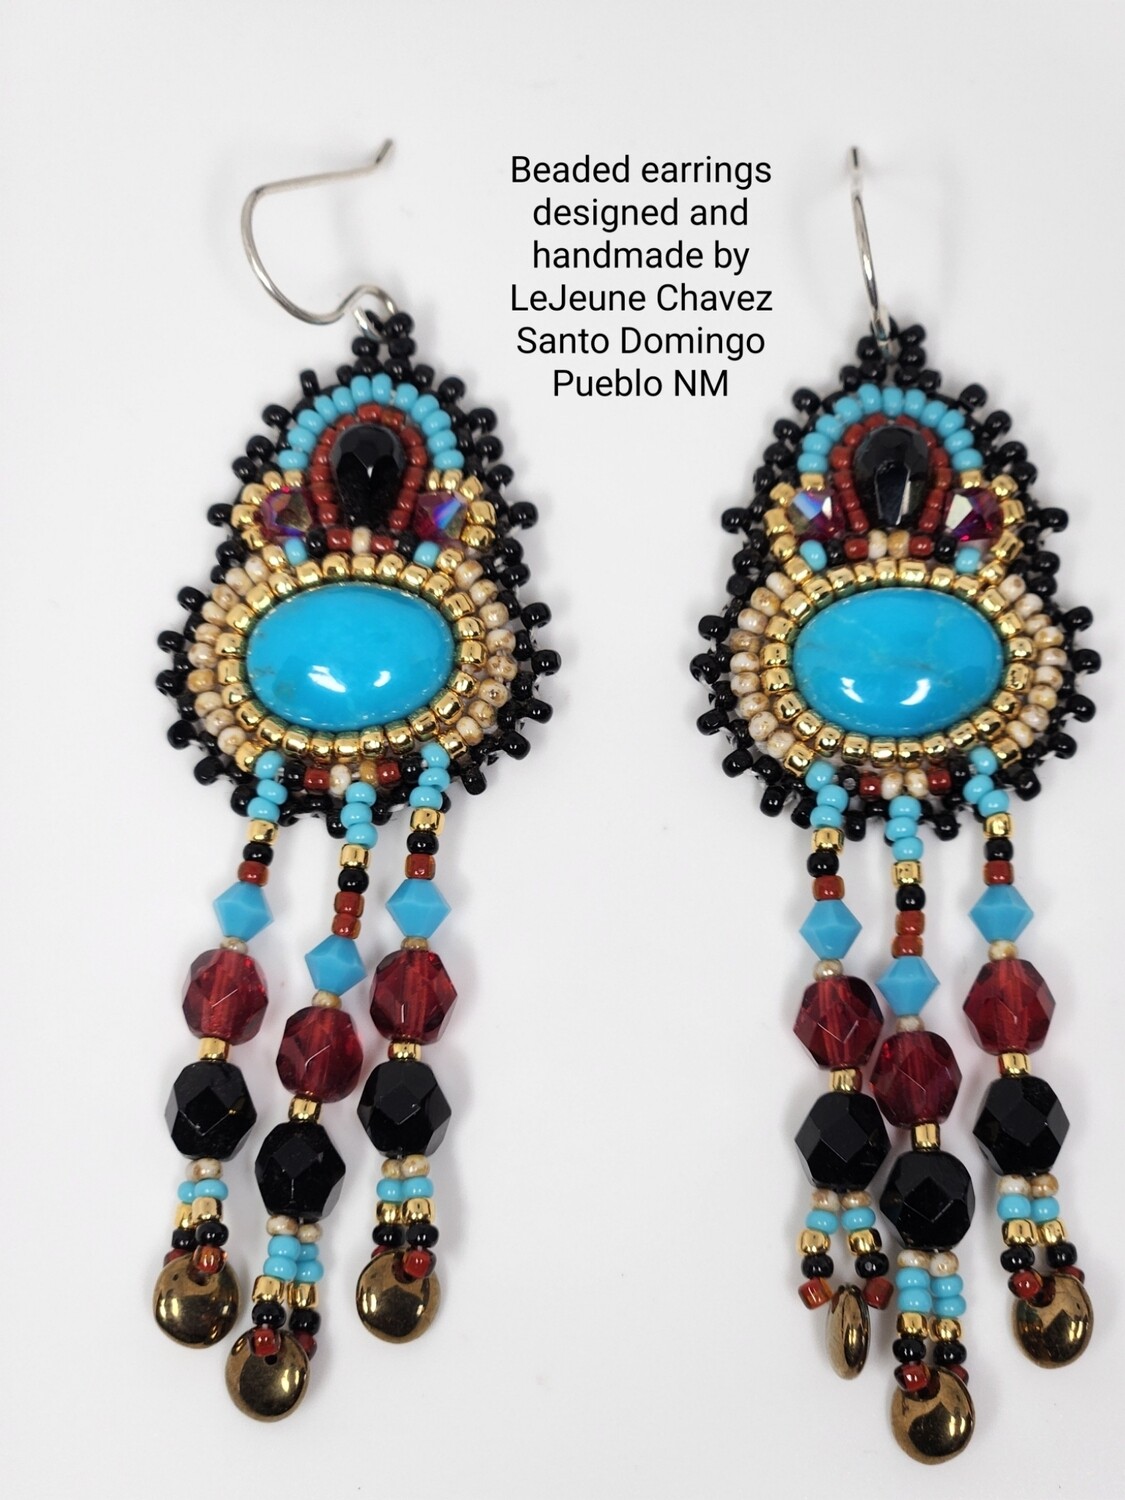 Beaded earrings with turquoise stones